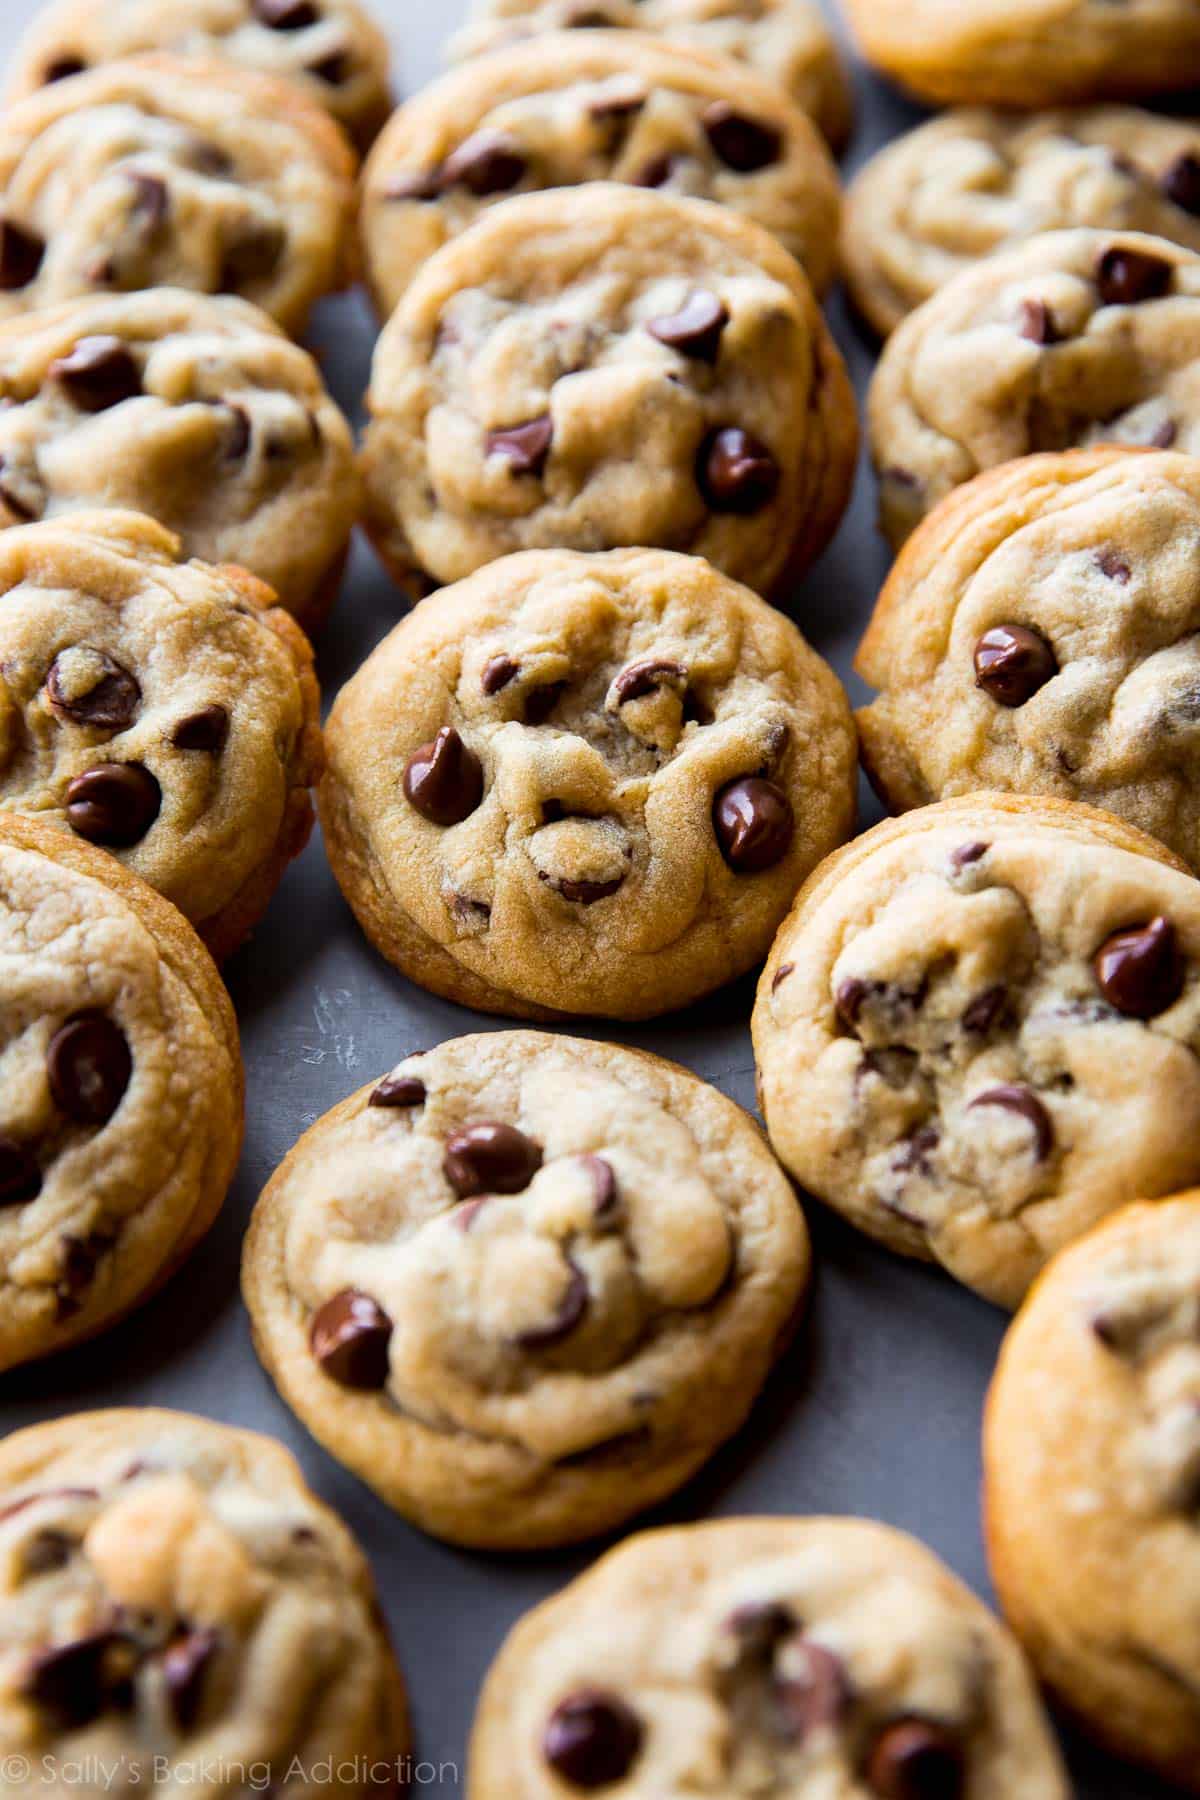 The Best Soft Chocolate Chip Cookies - Sallys Baking Addiction